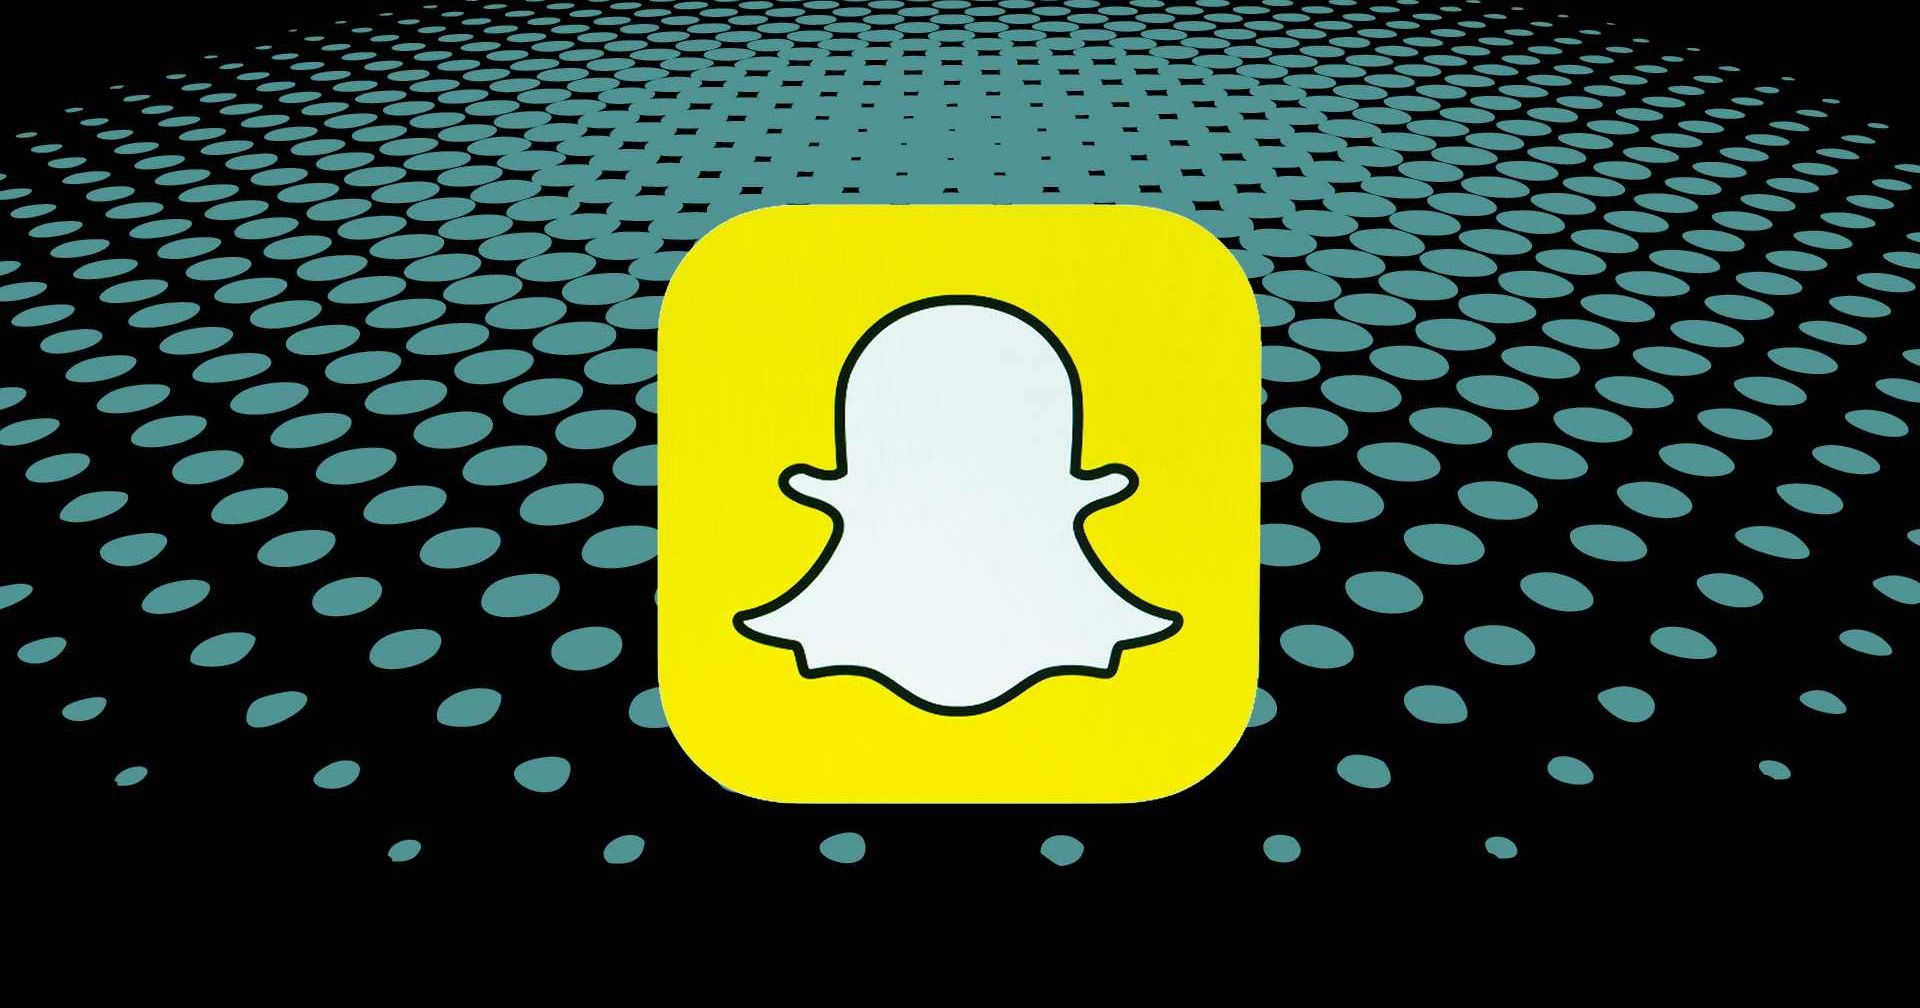 how to add people near you on snapchat